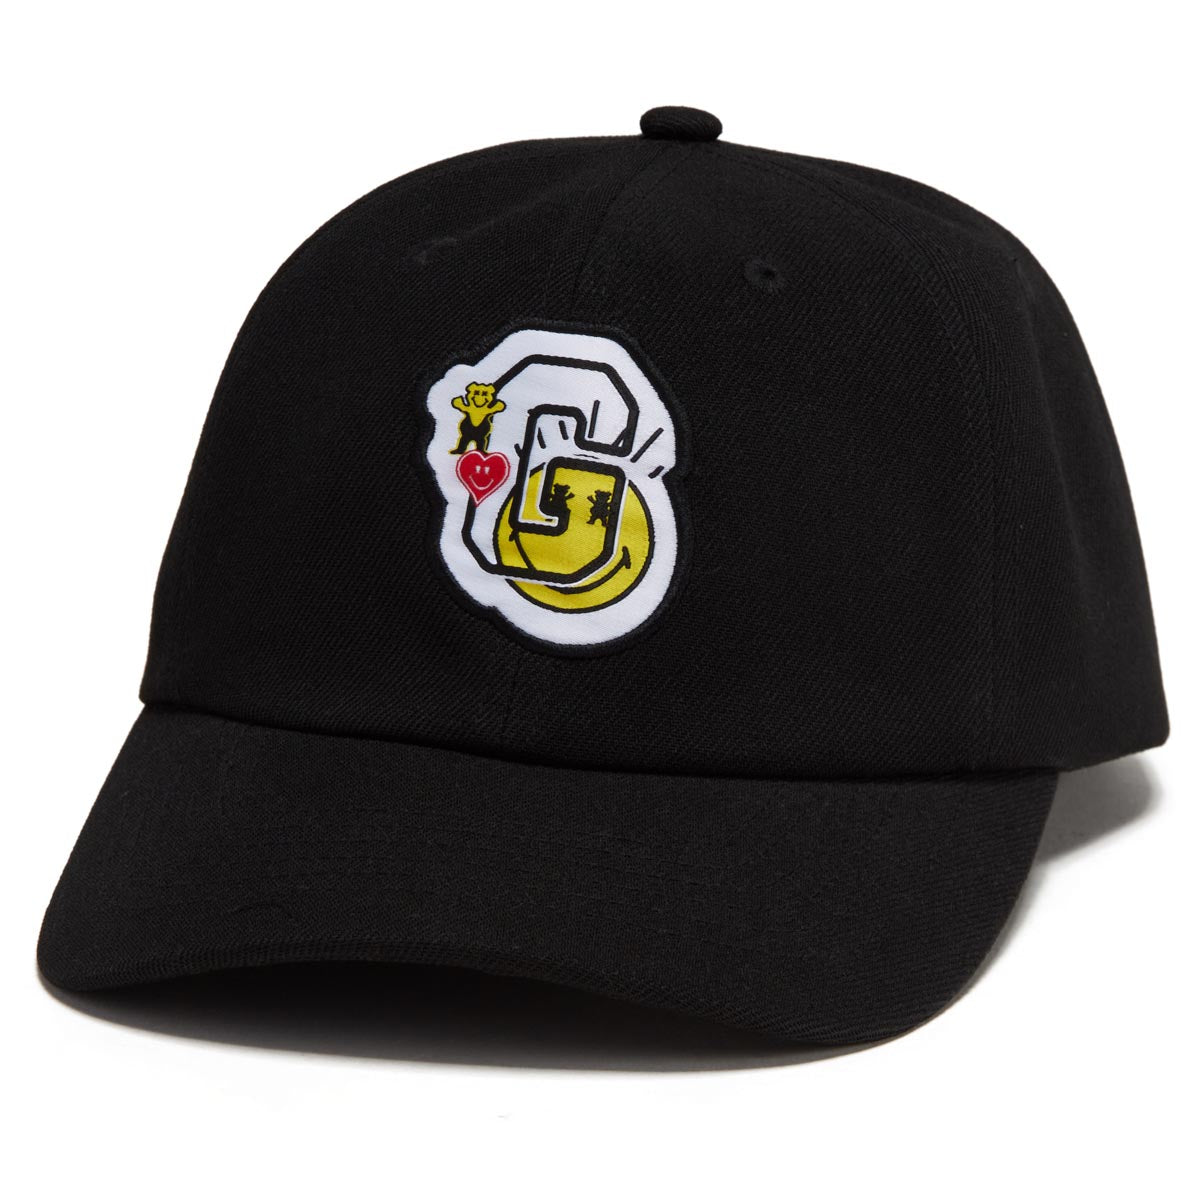 Grizzly x Smiley World Dad Hat - Black image 1